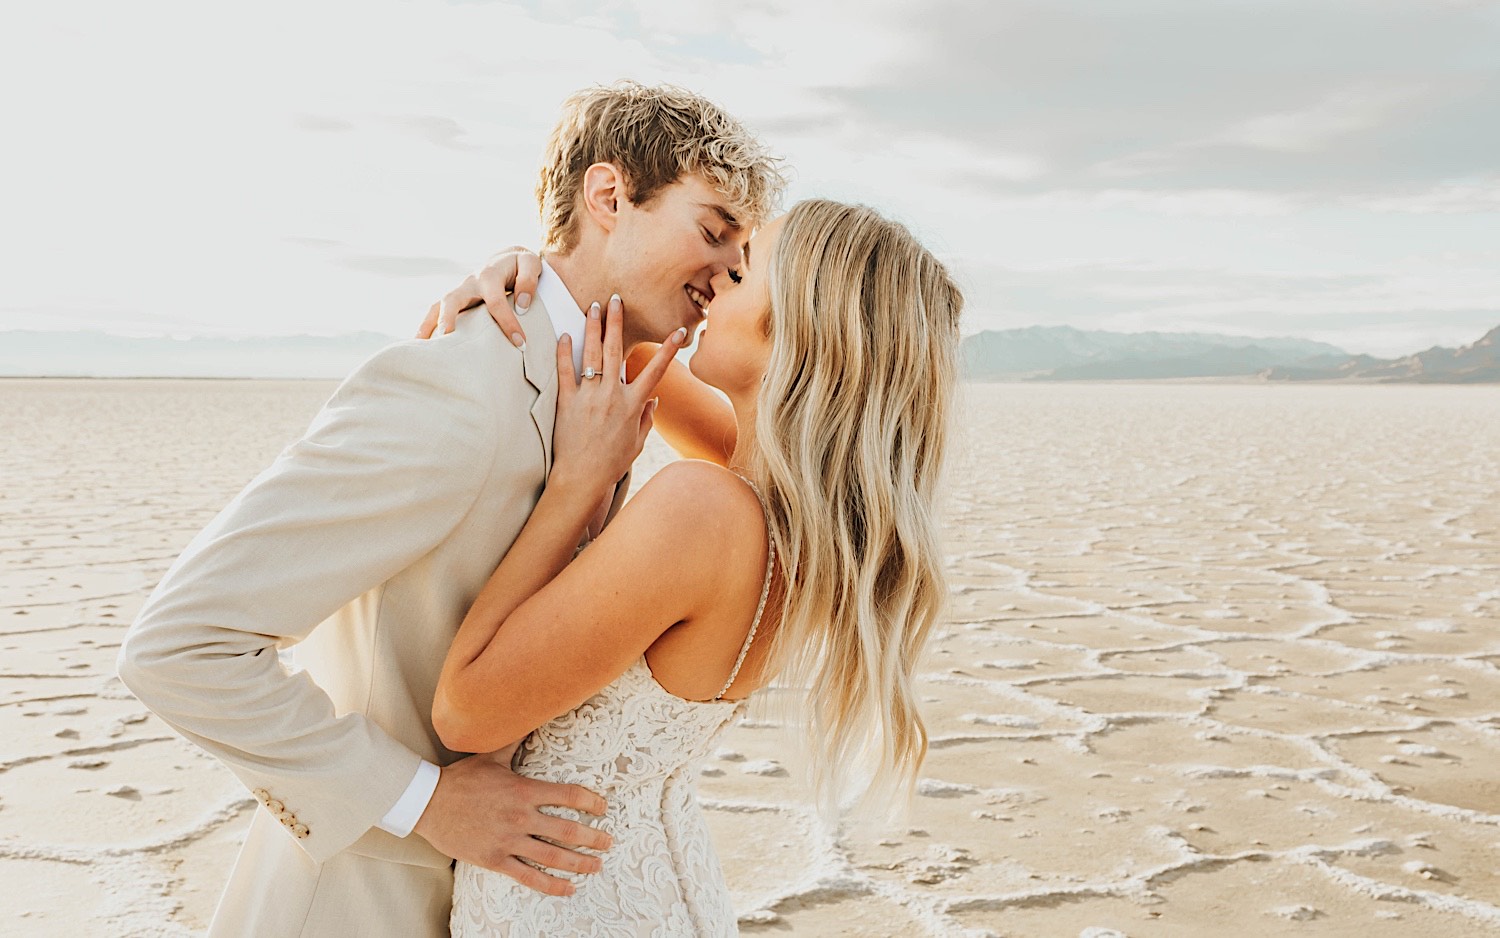 A bride and groom embrace in the Utah Salt Flats on their elopement day, the groom is smiling as they are about to kiss